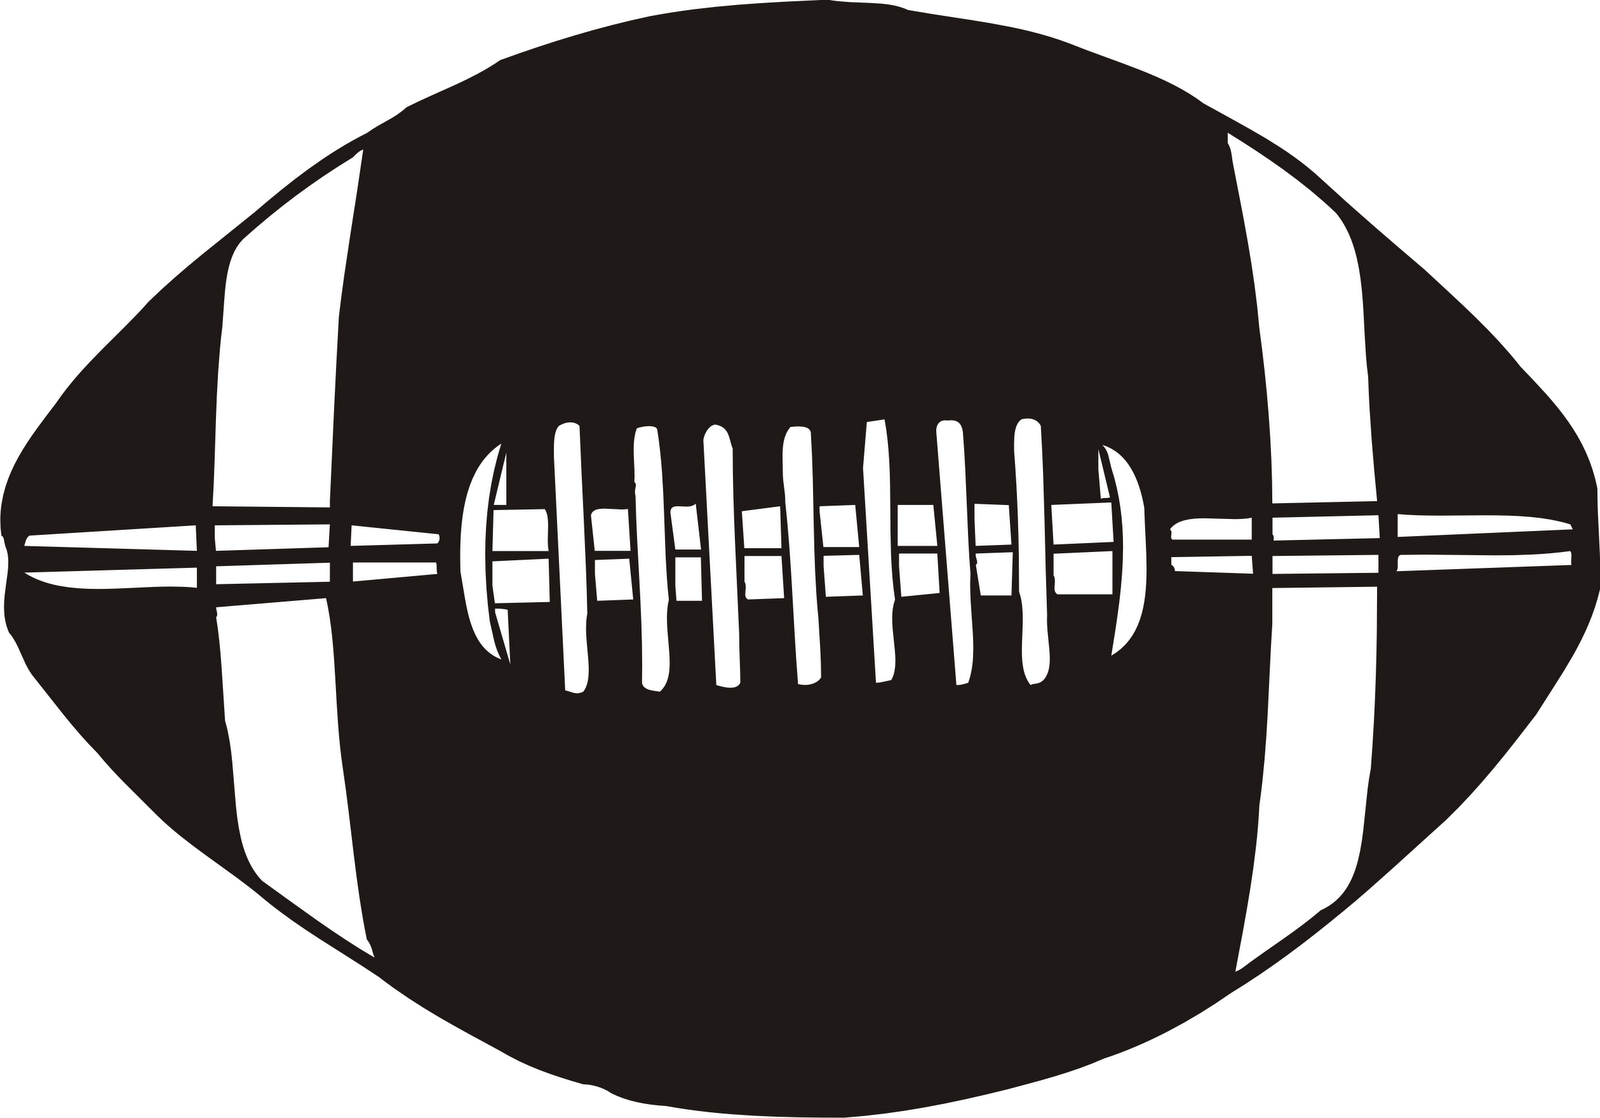 Image of a football clipart